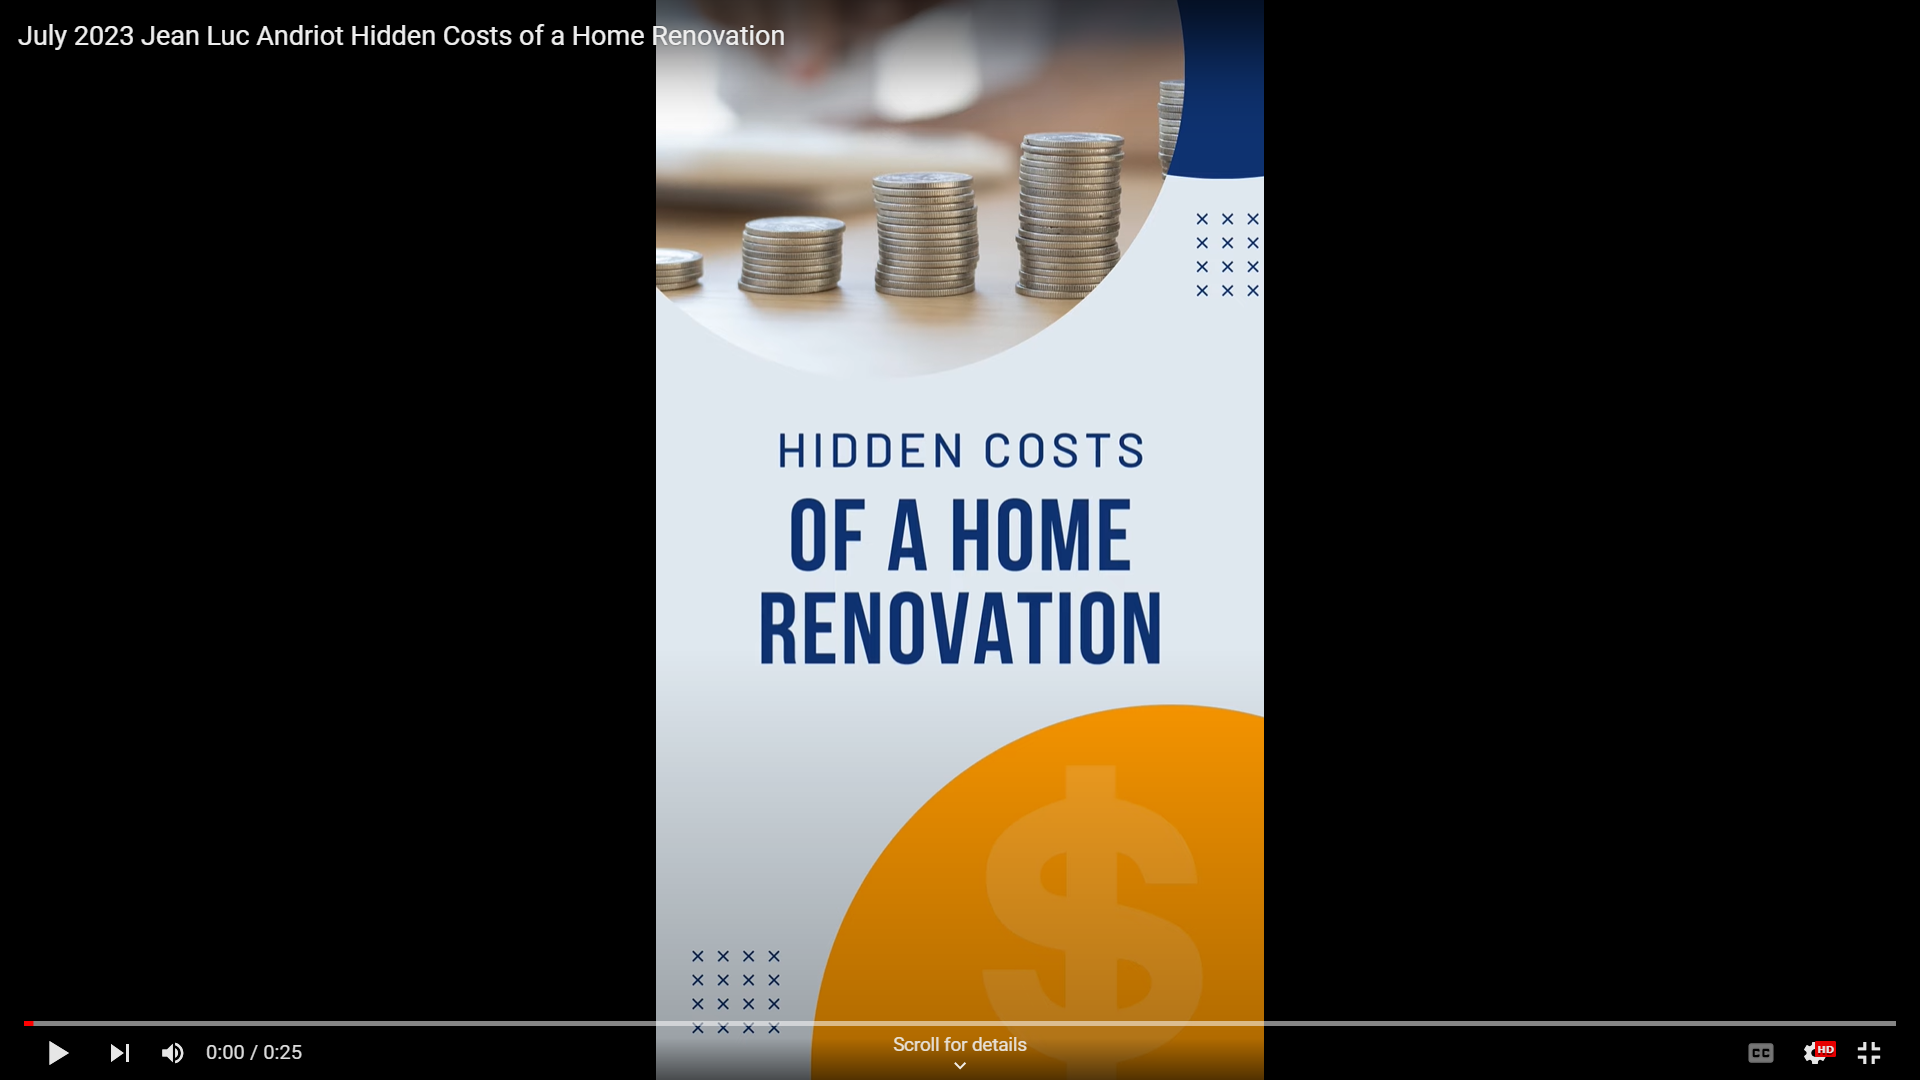 The Hidden Costs of Home Renovation for Jean-Luc Andriot blog 072823